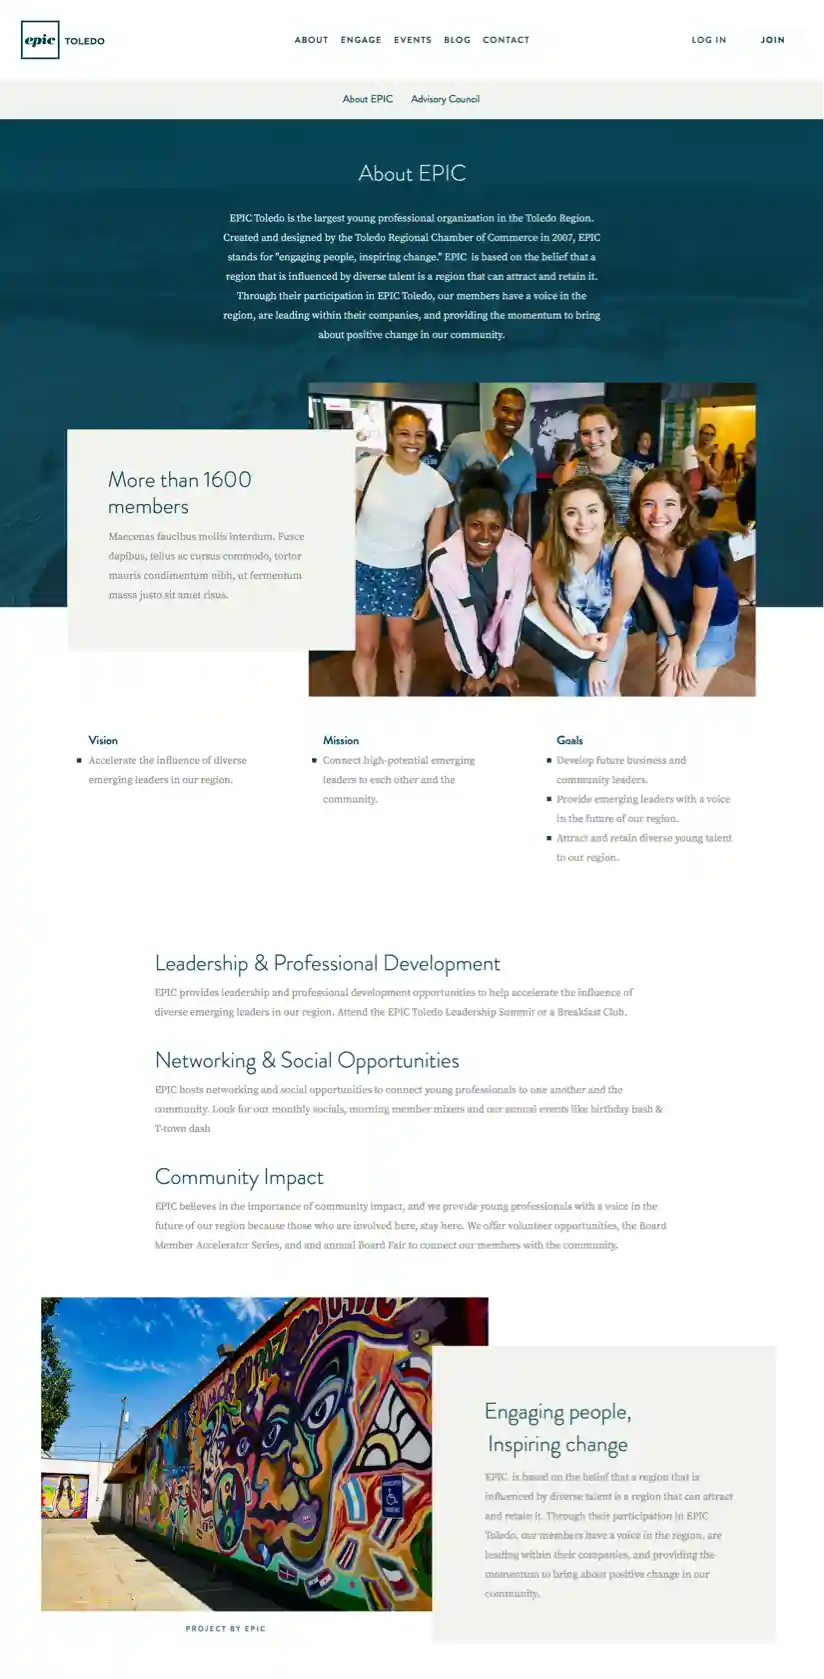 Screenshot of the design concept for the EPIC Toledo about page, giving users quick access to the mission, vision and goals of the organization as well as information about the program’s leadership council.